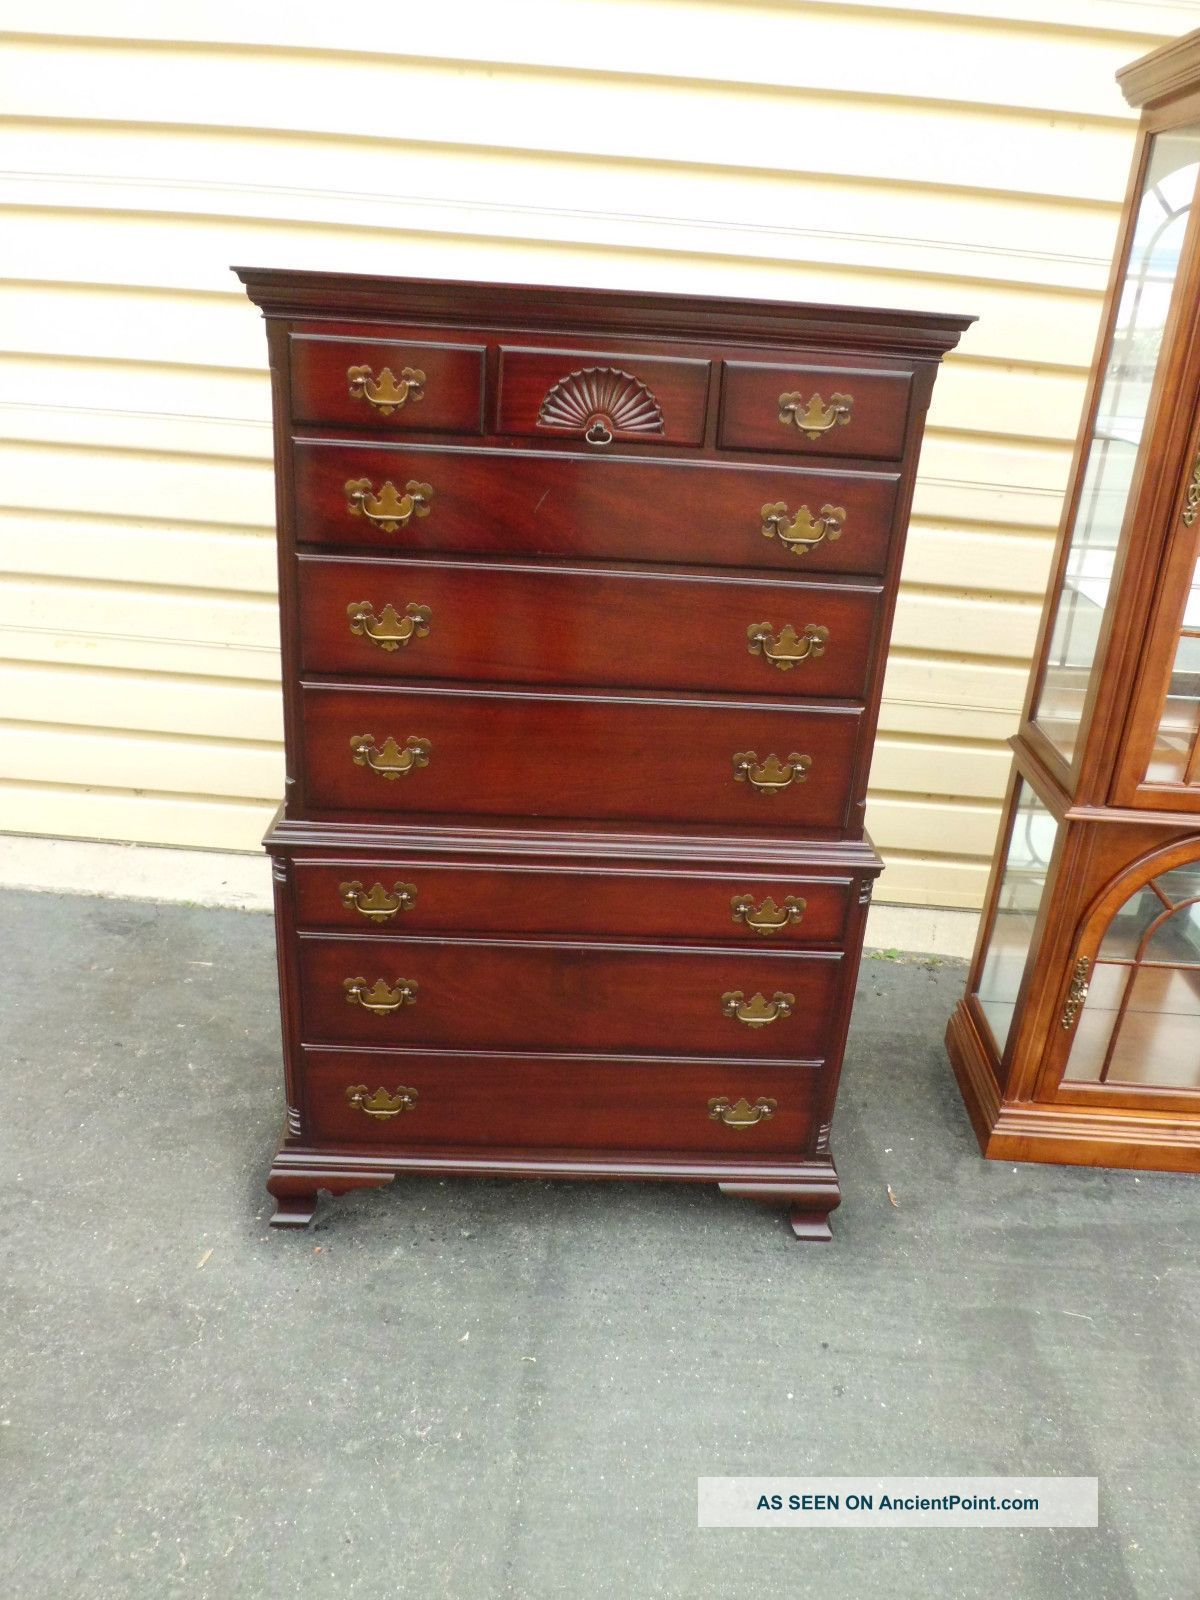 50523 Kling Mahogany High Chest Dresser Post 1950 Photo Furniture within dimensions 1200 X 1600